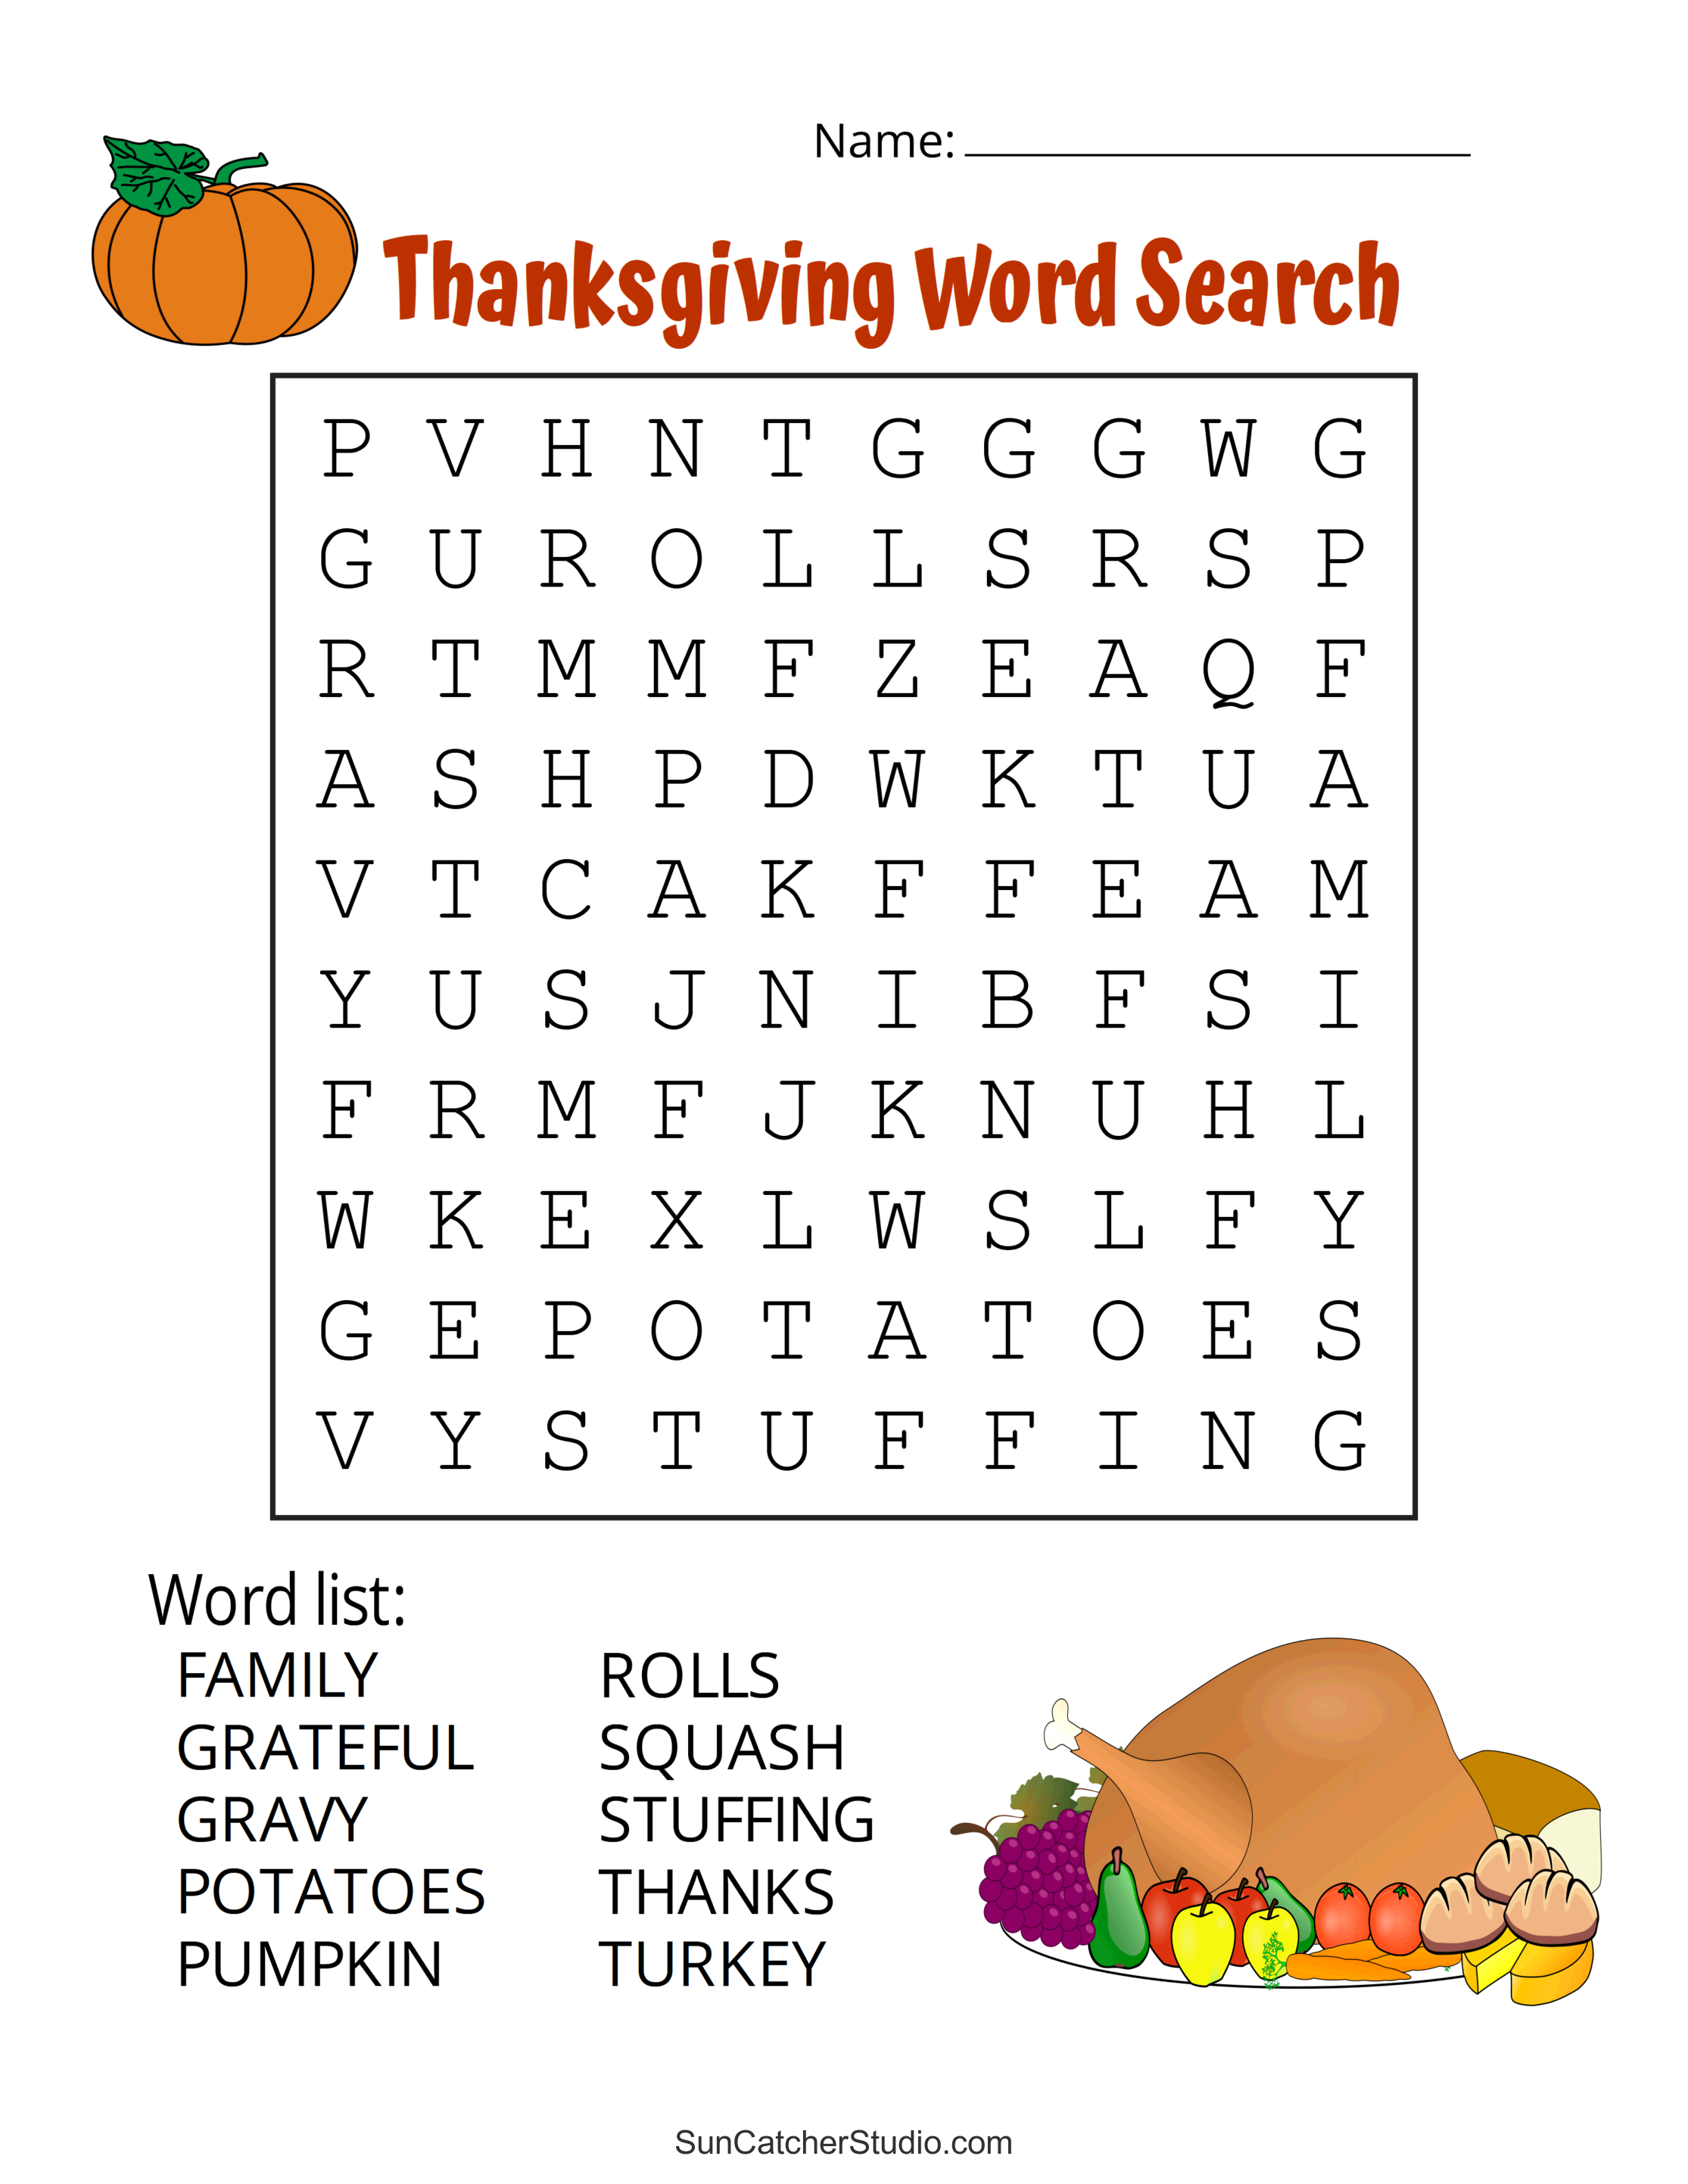 thanksgiving-word-search-free-printable-puzzles-diy-projects